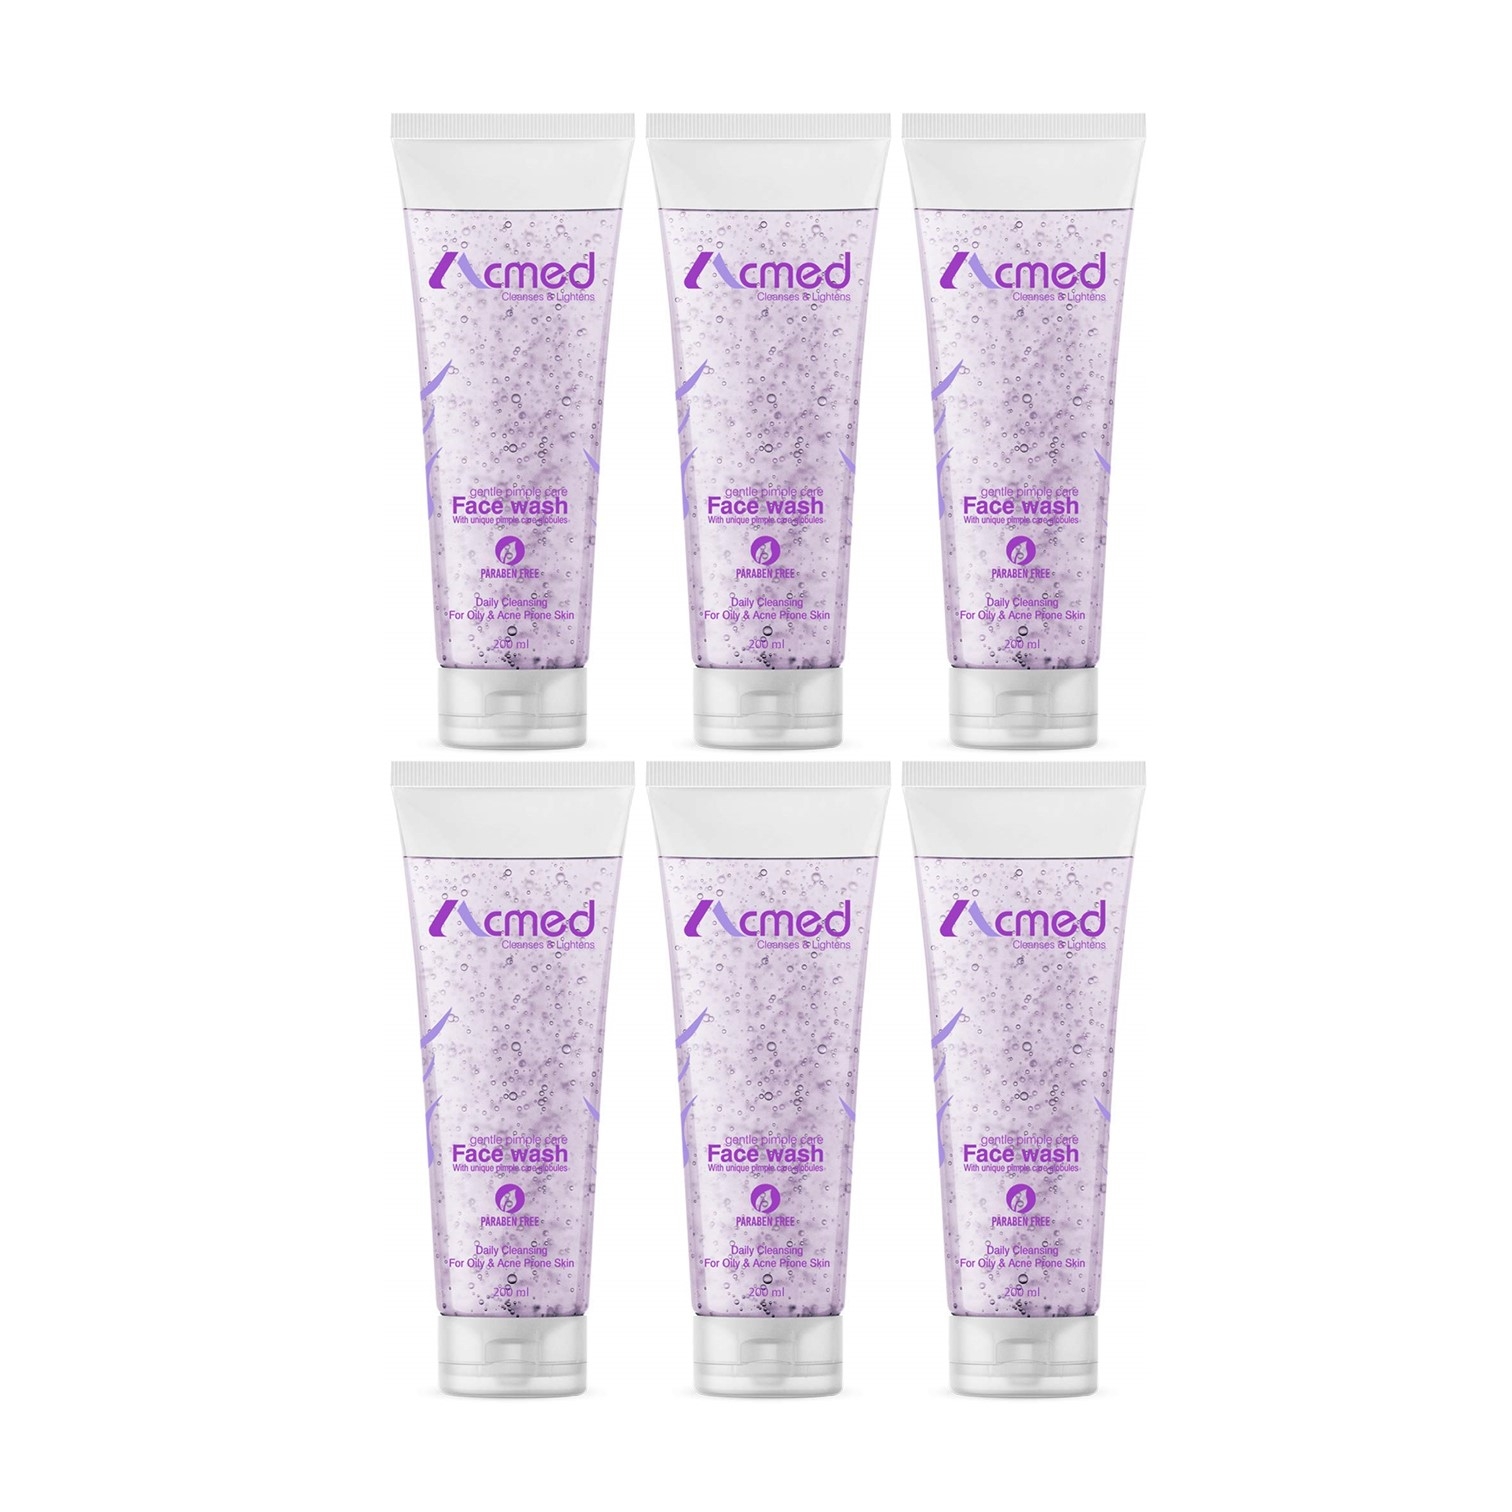 Acmed Pimple Care Face Wash for Acne Prone Skin (200grams) : Pack of 6